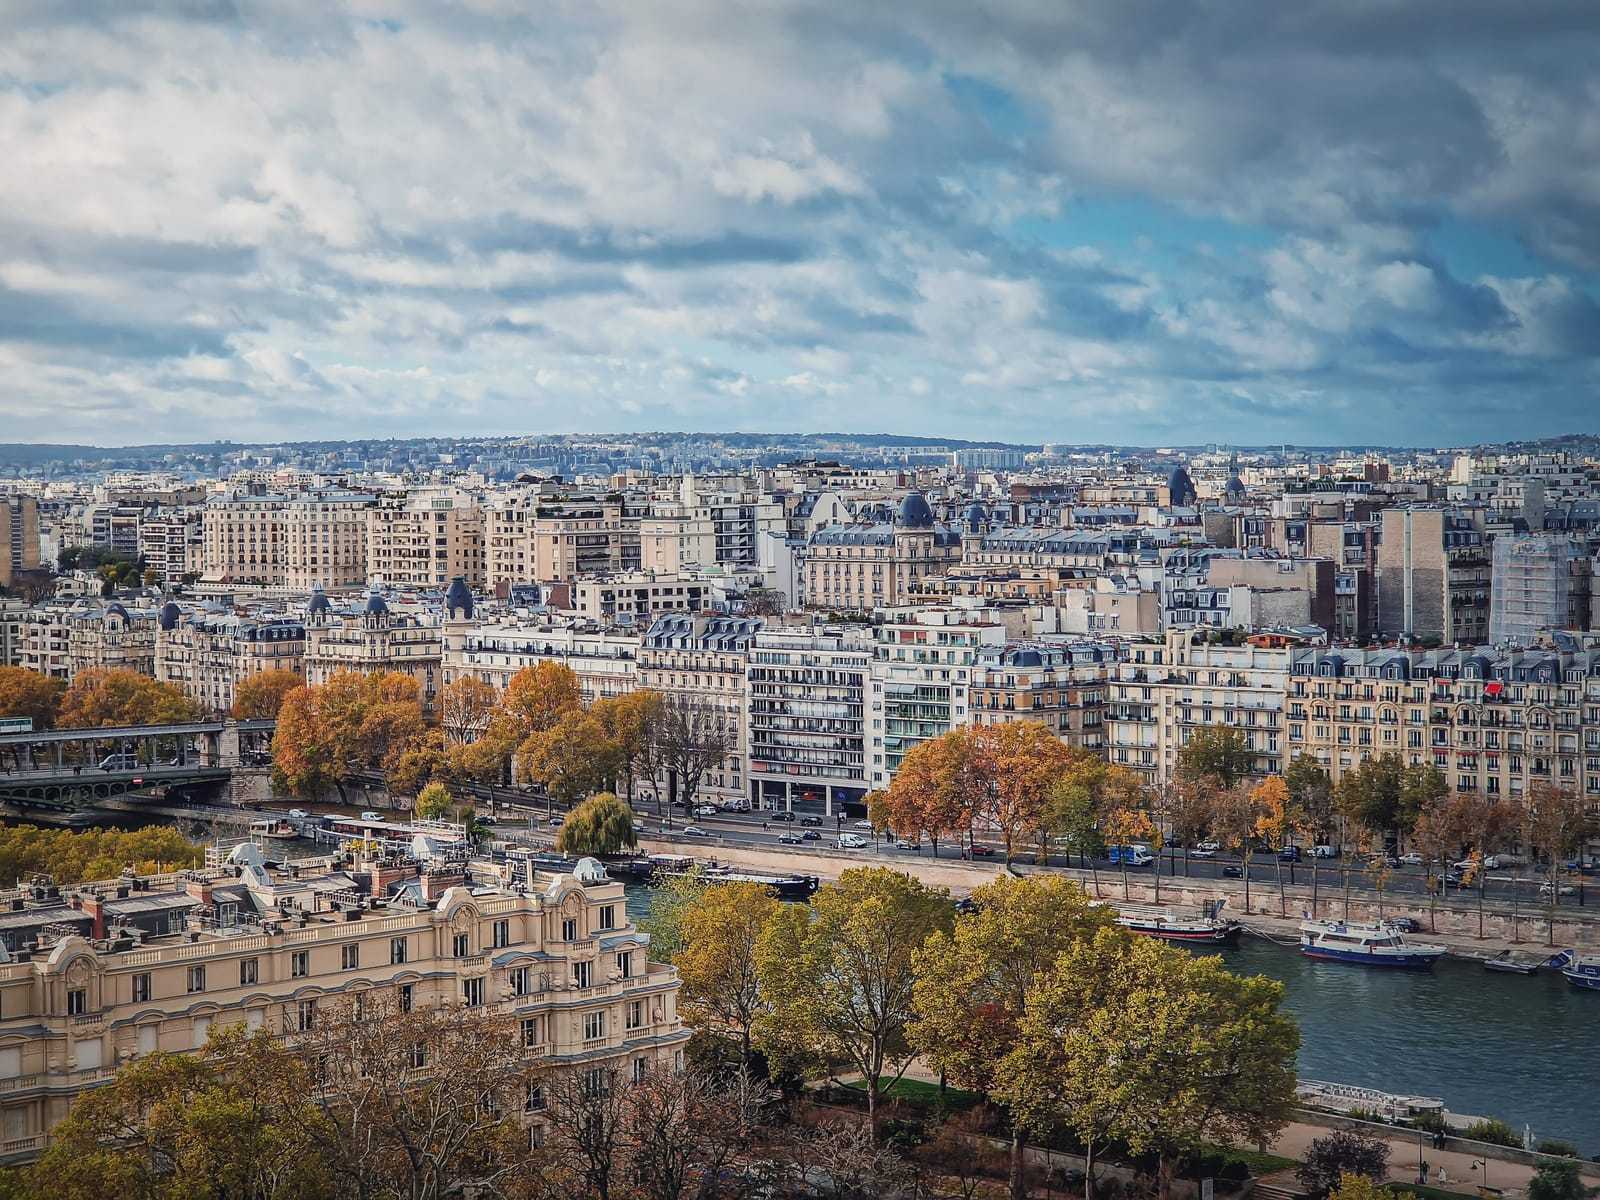 What is the best time to do the Seine River cruise in Paris?